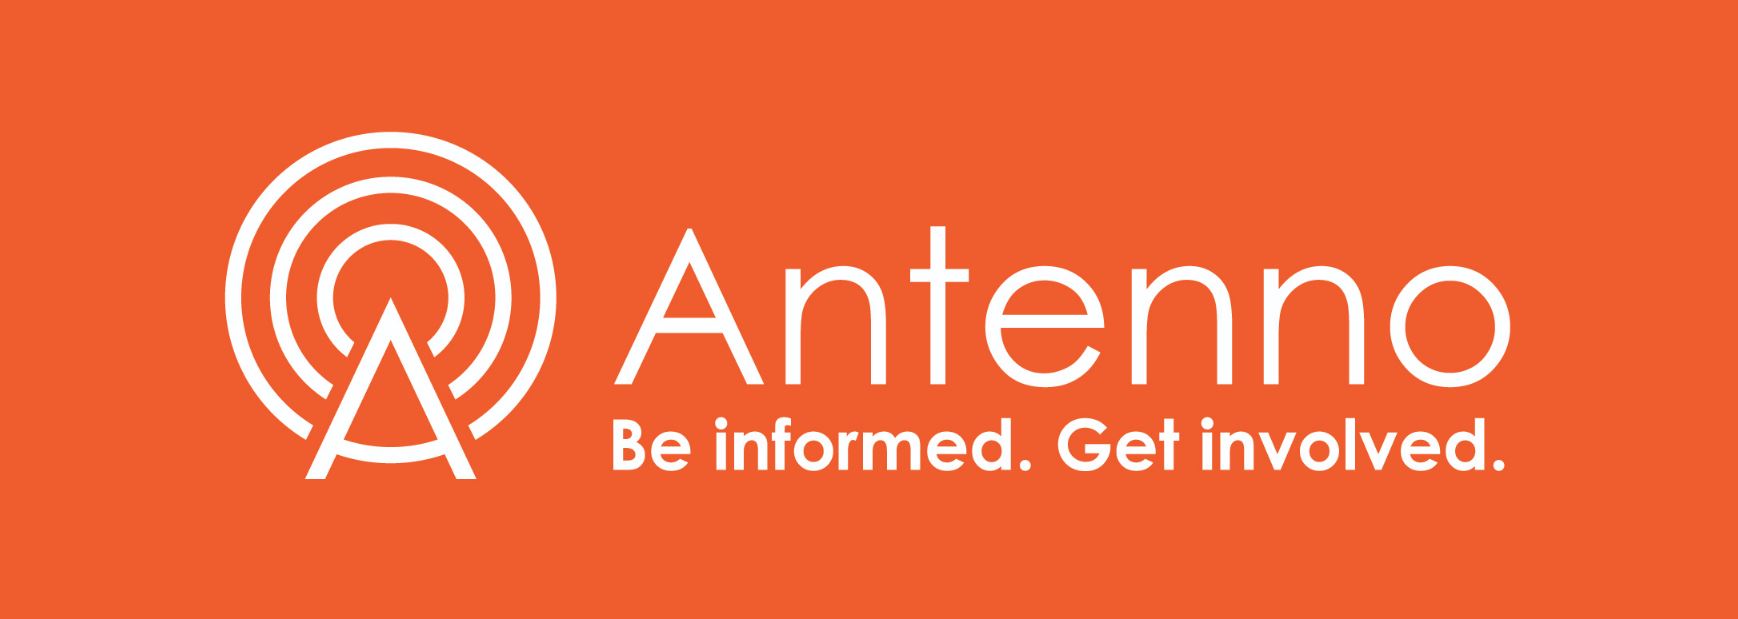 Antenno App launched 